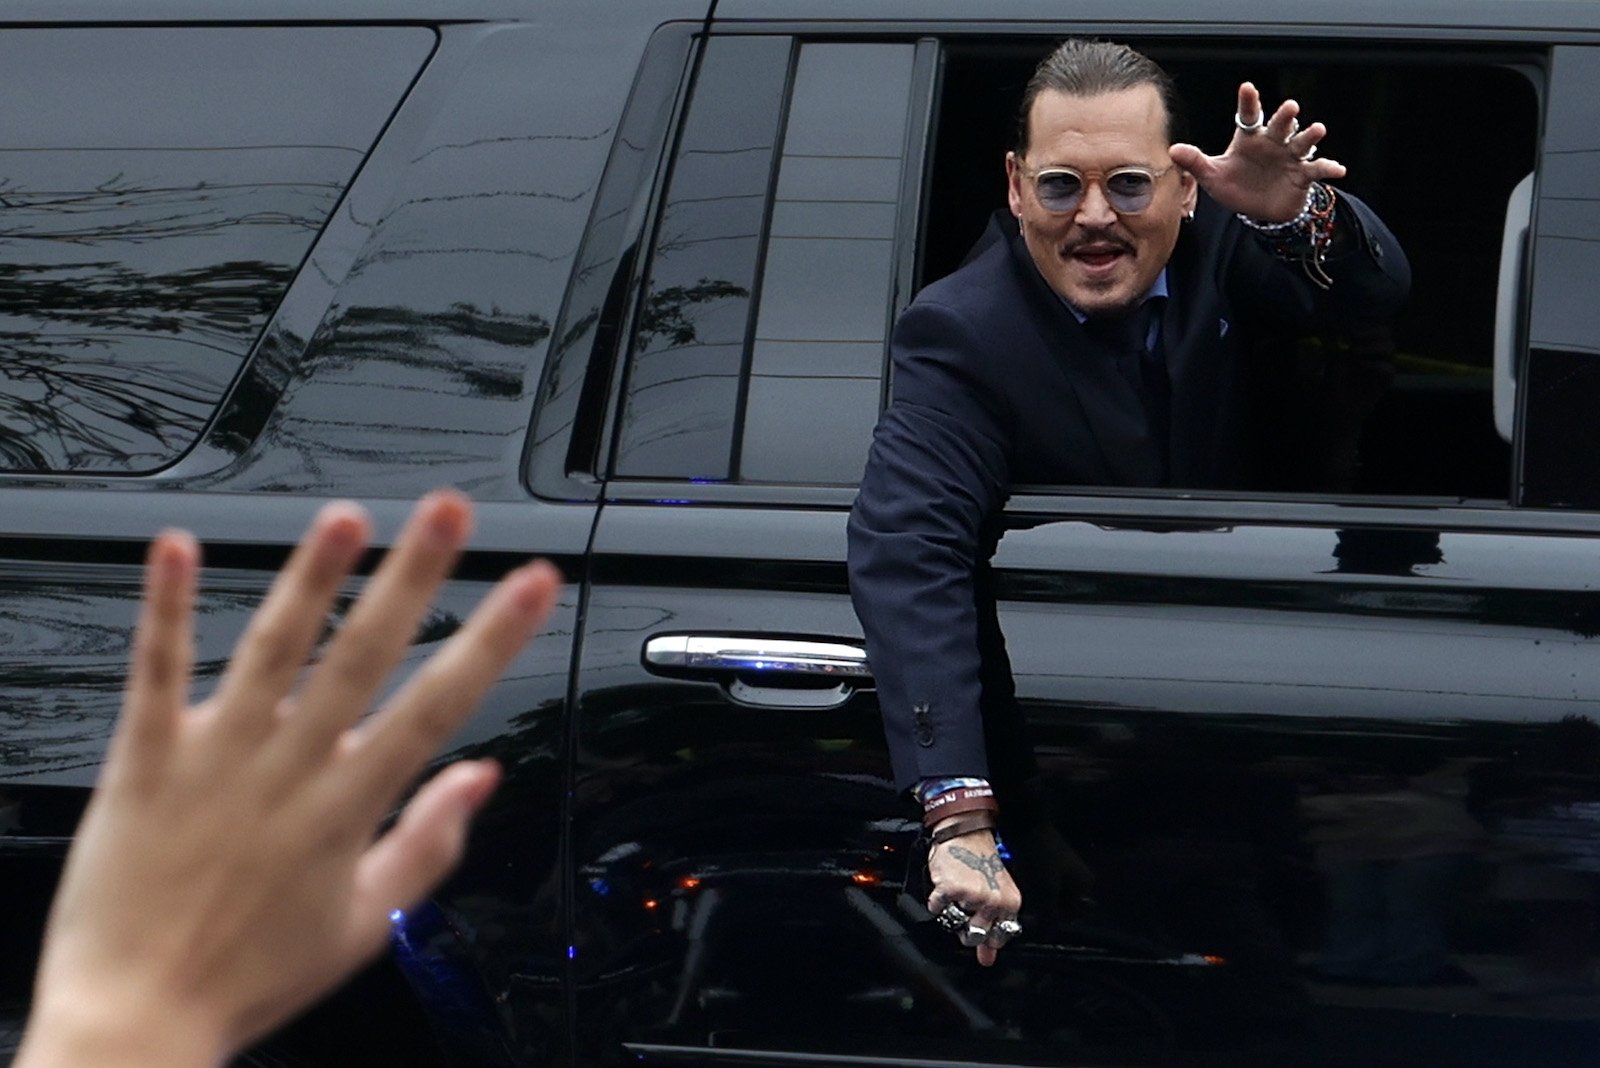 Johnny Depp waves to fans after being in court 